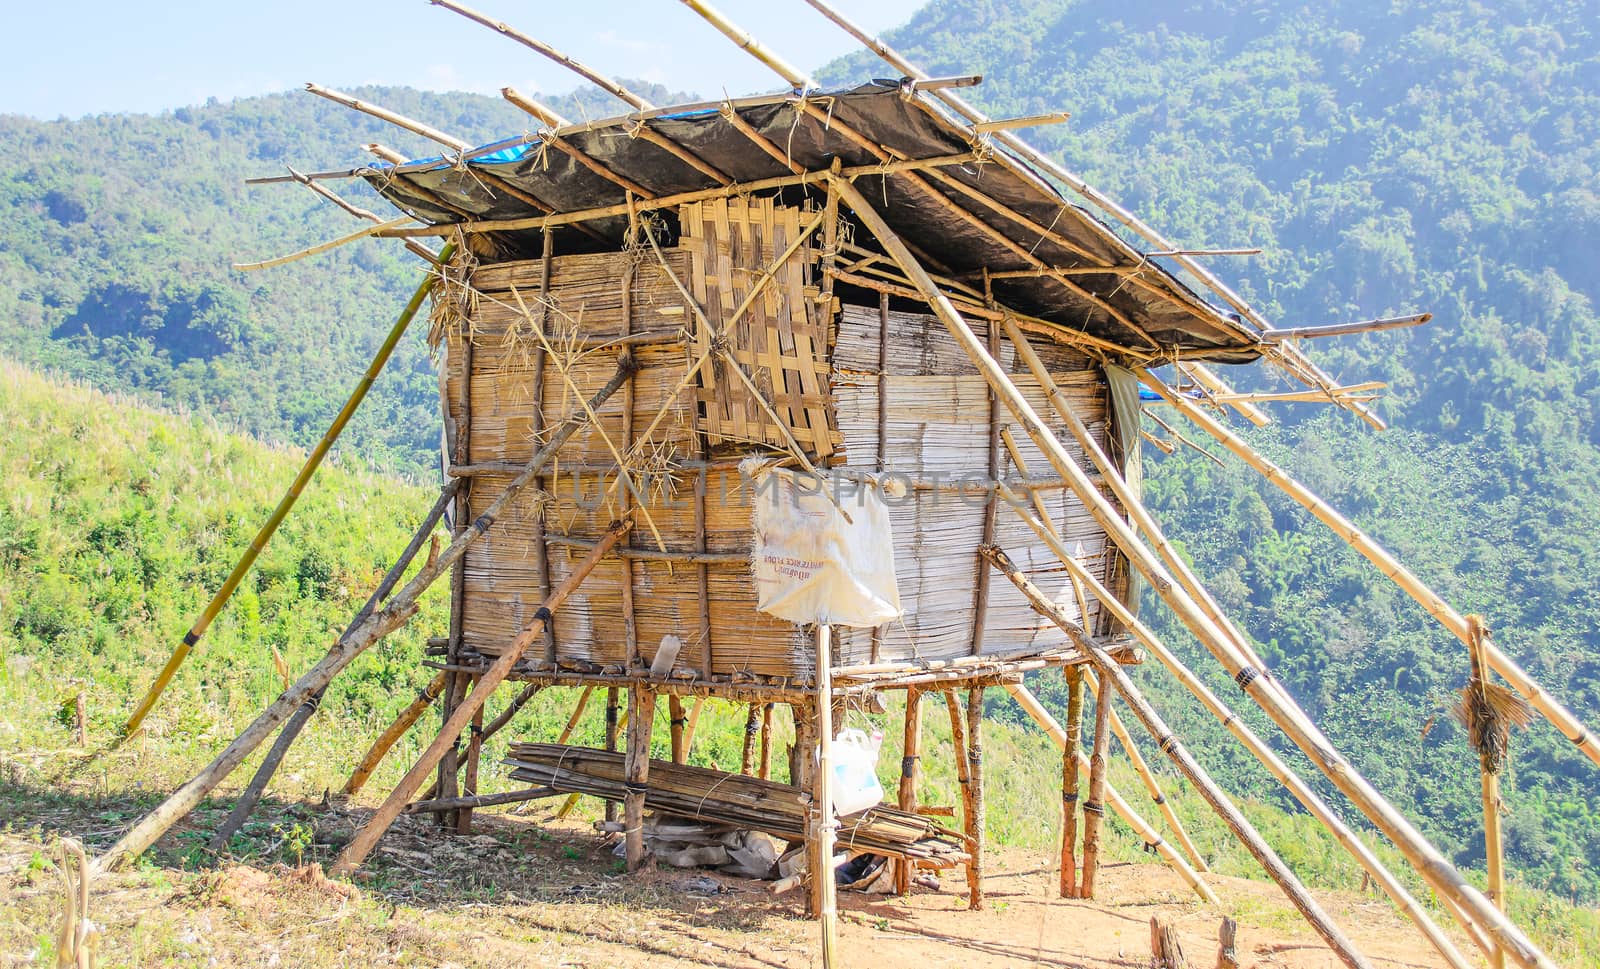 The Barn of Corn made from bamboo.